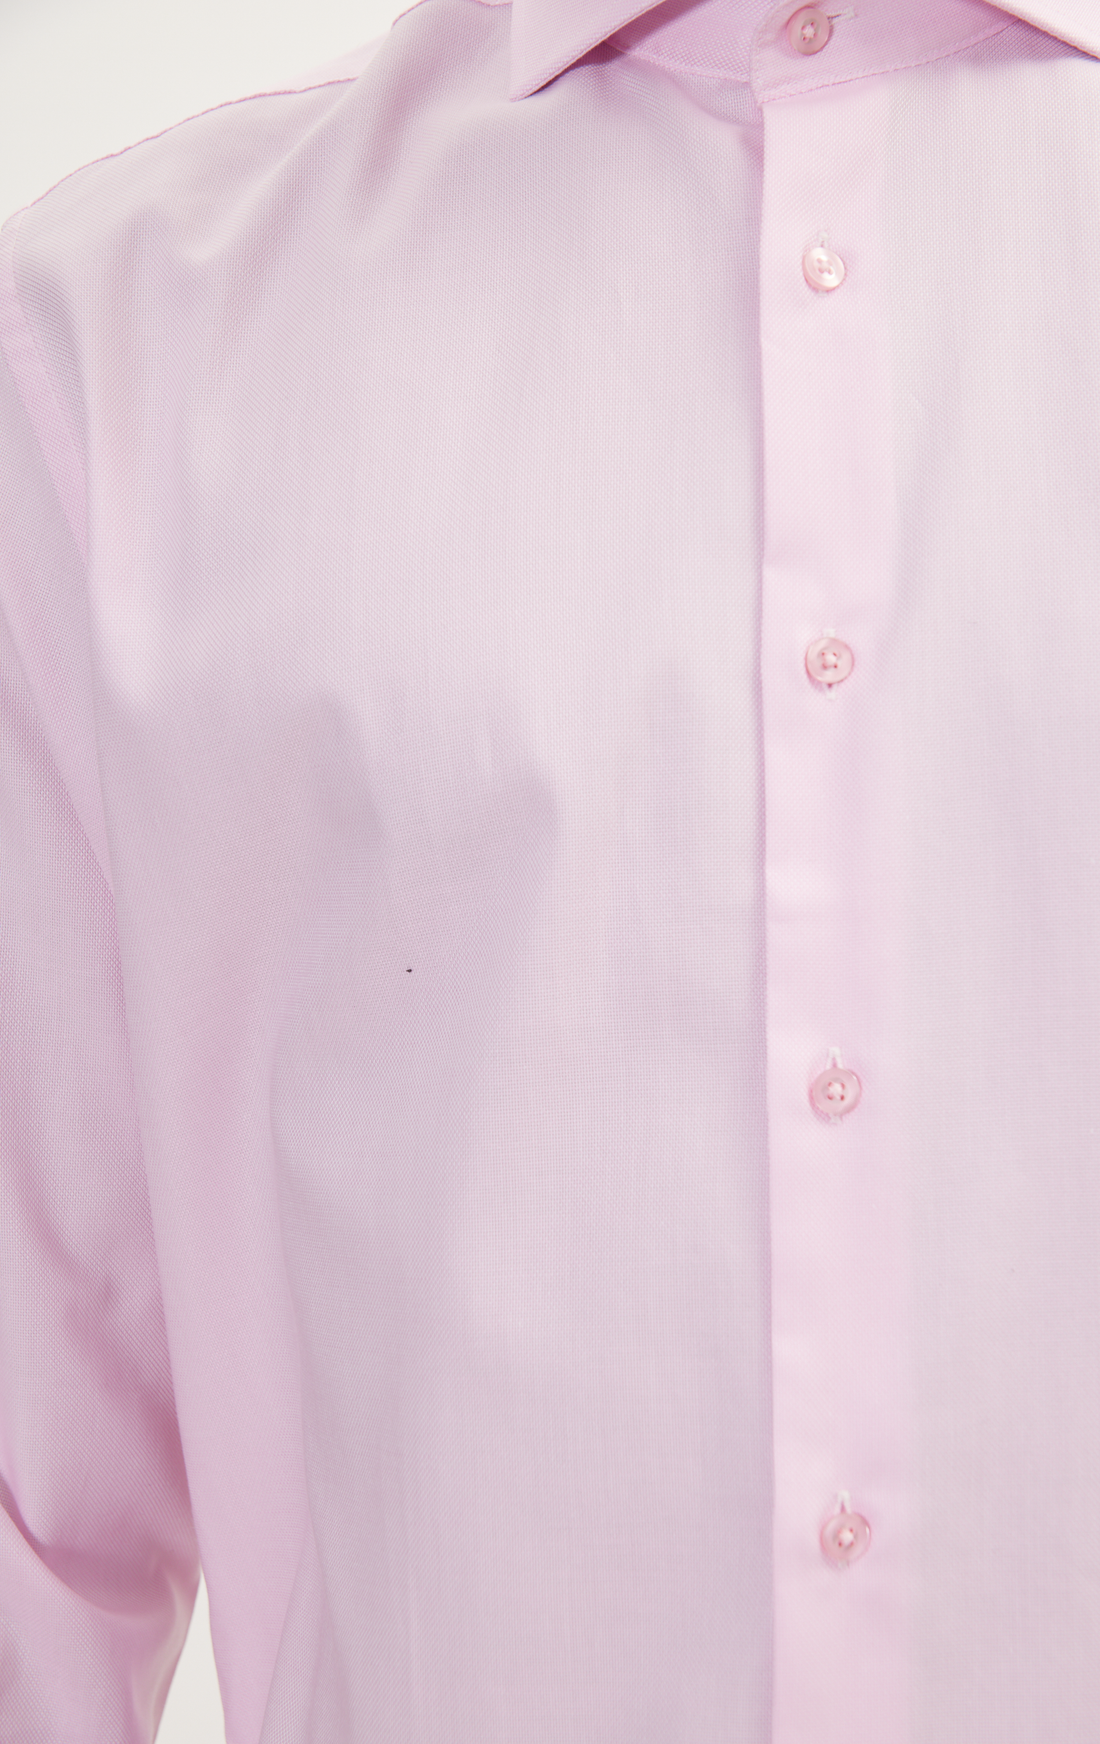 N° AN4902 PURE COTTON FRENCH PLACKET SPREAD COLLAR DRESS SHIRT - WHITE PINK OXFORD